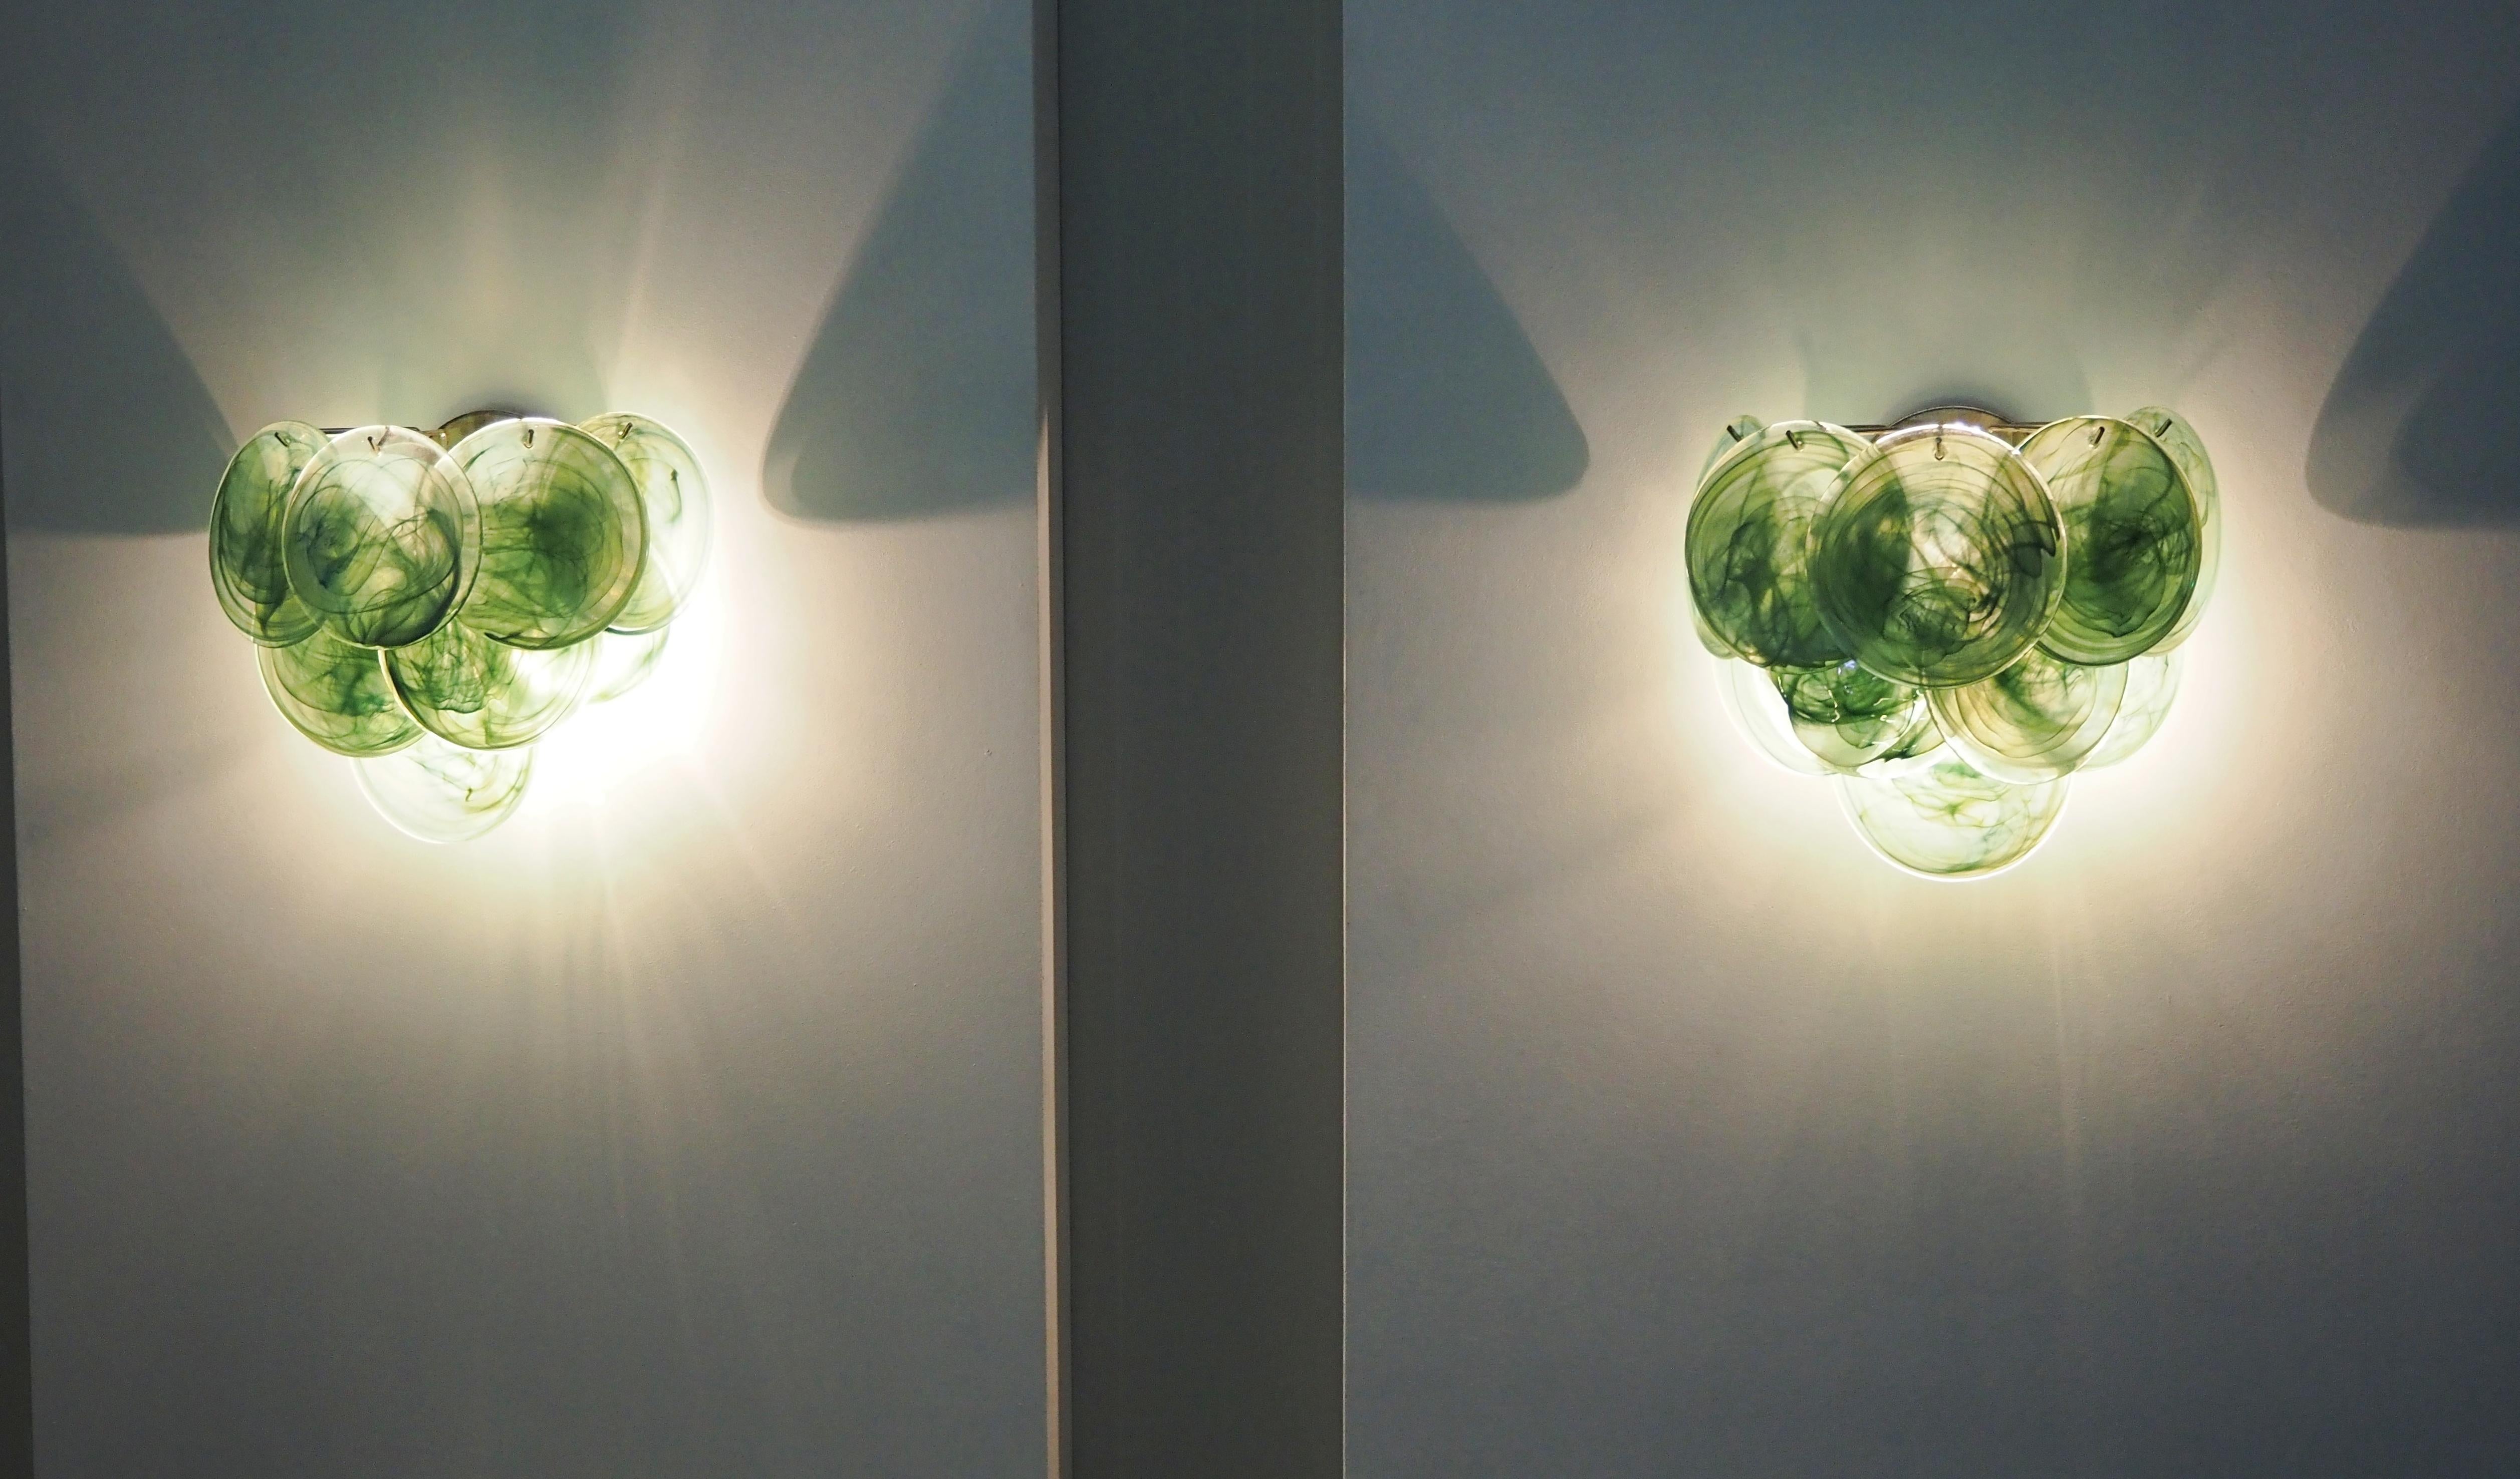 Pair of Glass Wall Sconces - 10 Iridescent Alabaster Green Discs 1